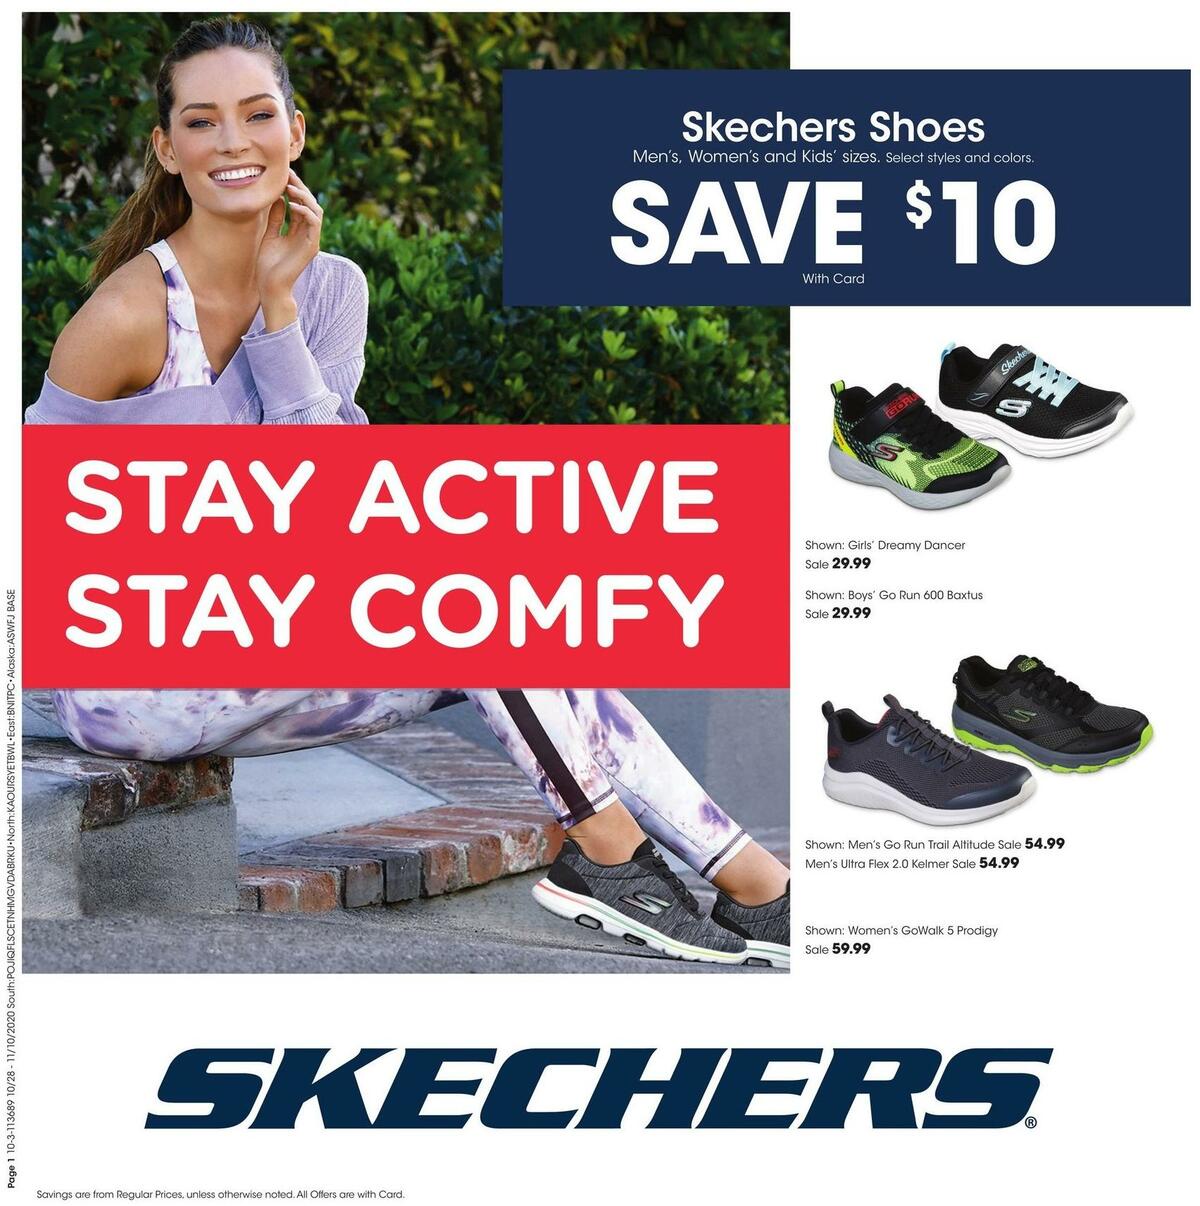 Fred Meyer Skechers Weekly Ad from October 28